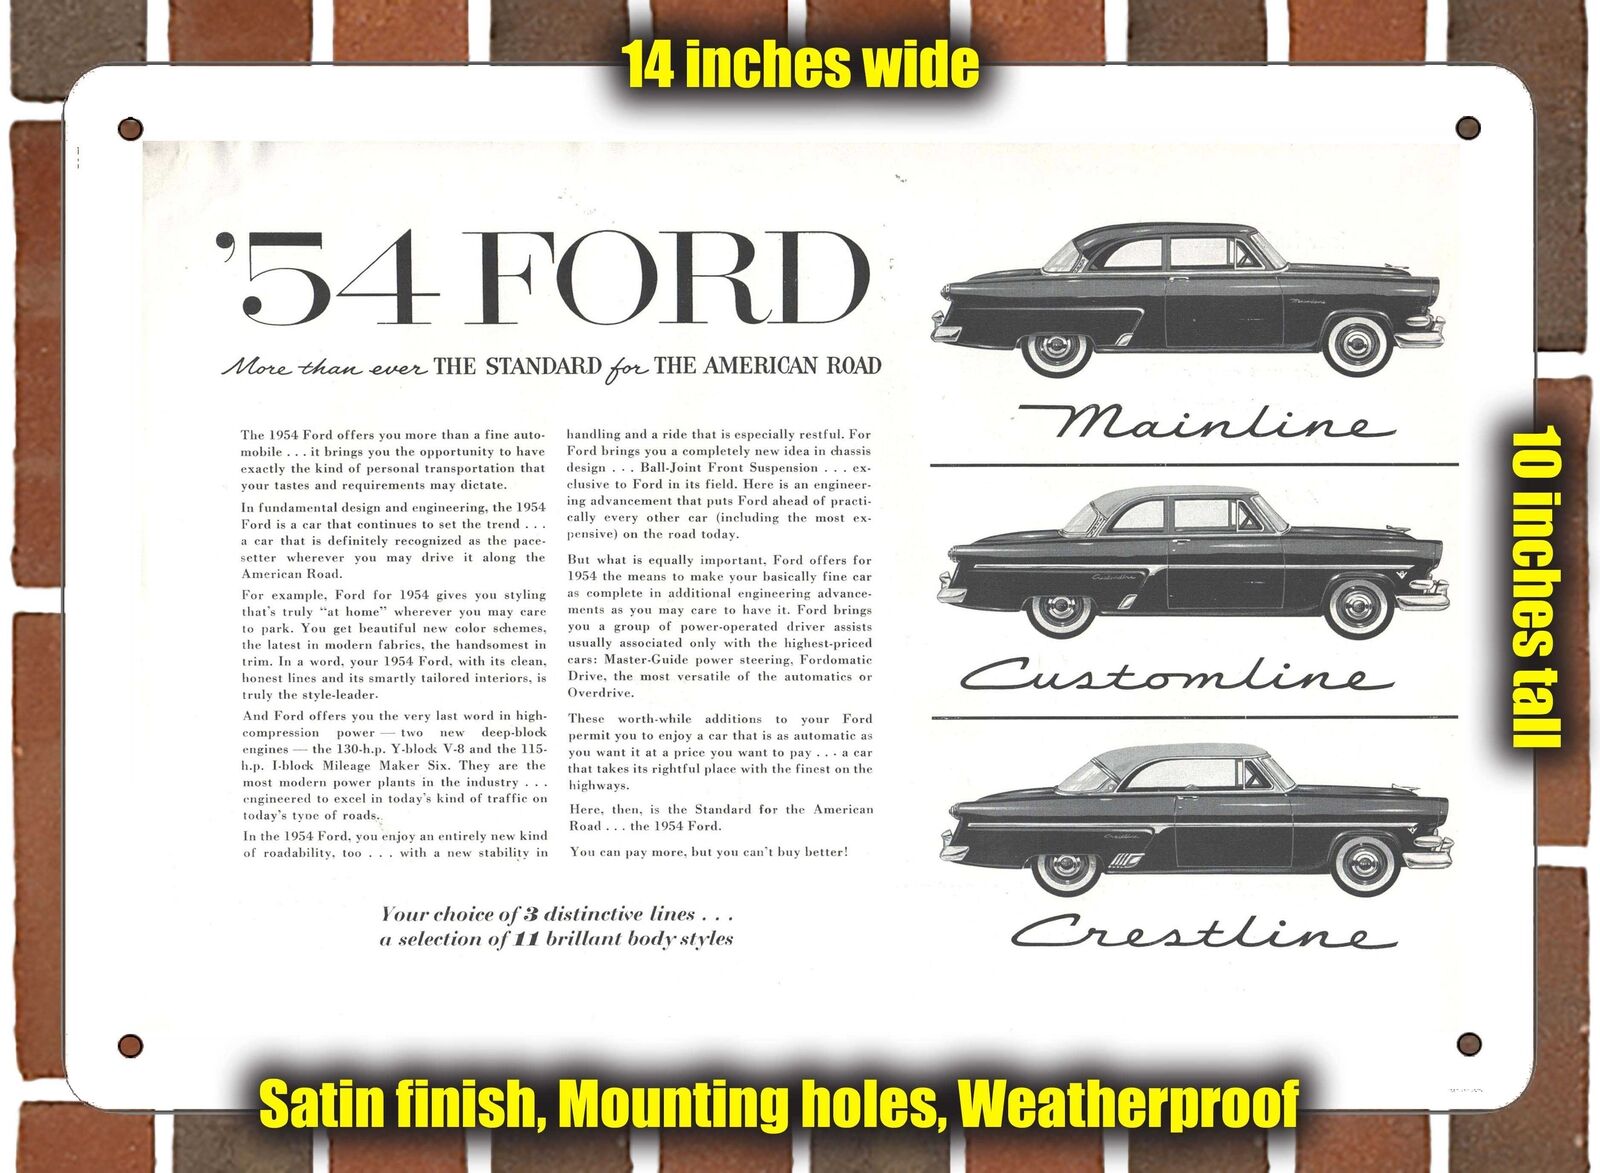 METAL SIGN - 1954 Ford